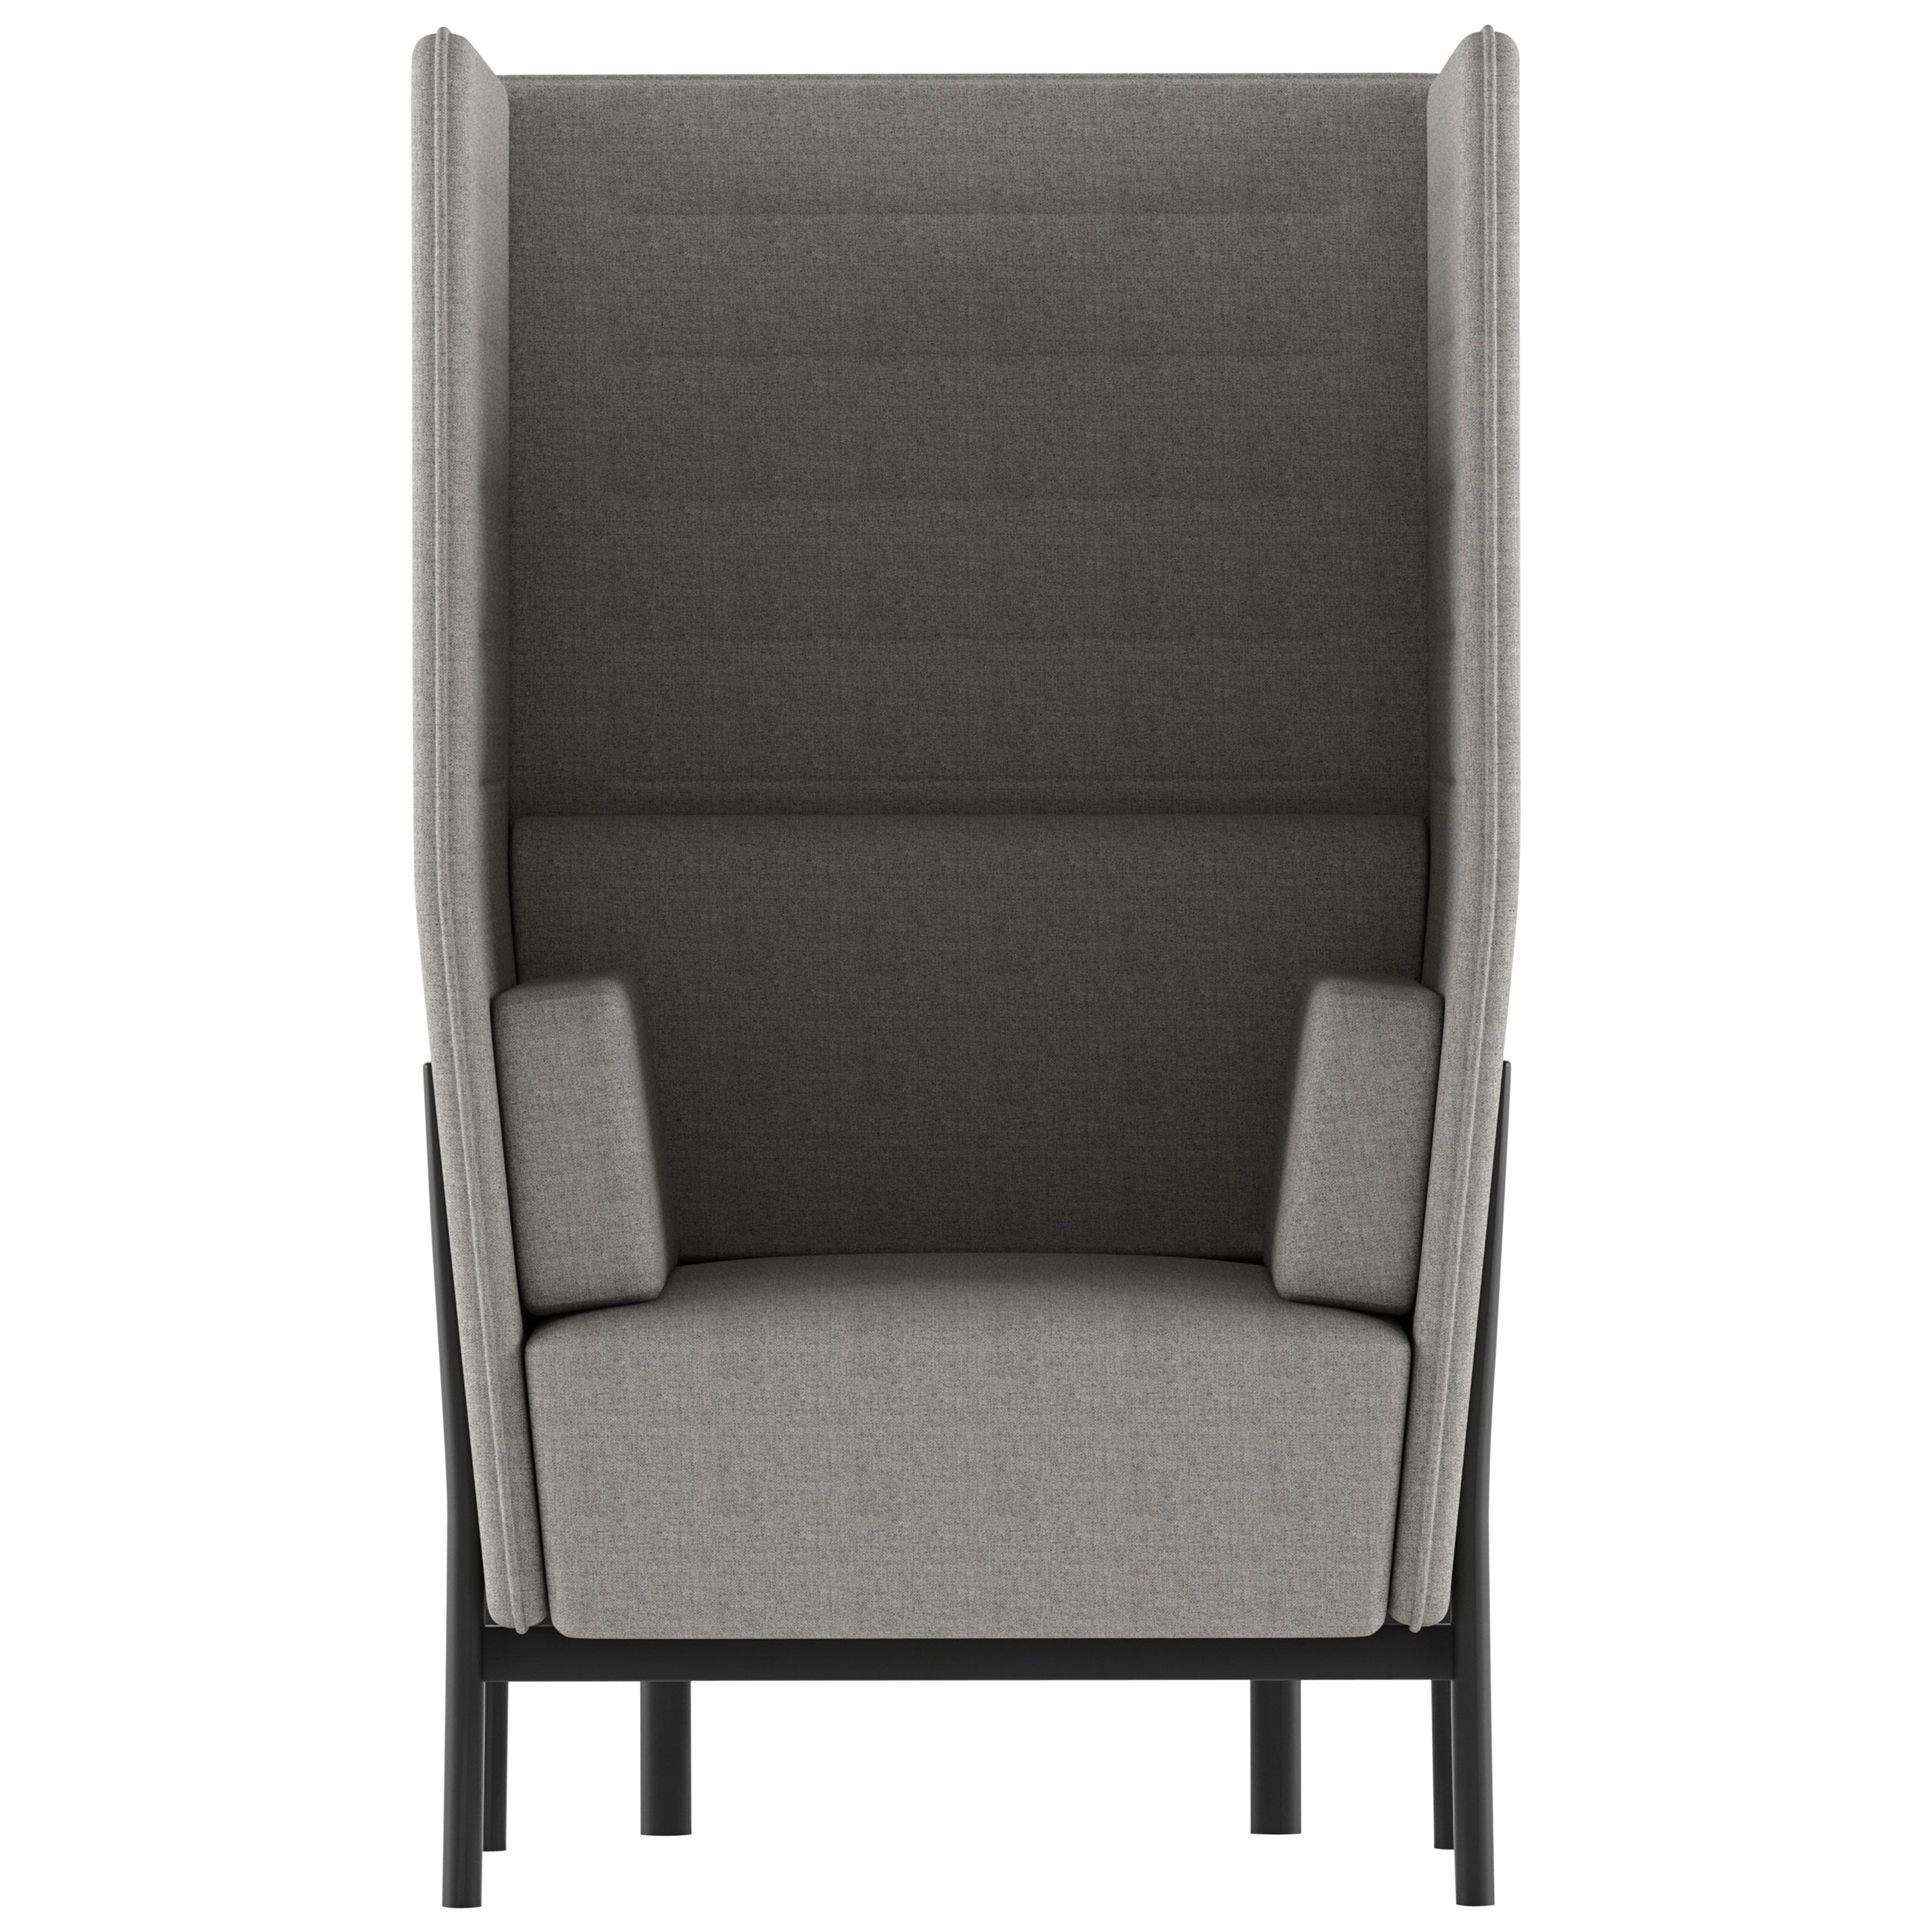 Alias 865 Eleven High Back One Seater Sofa in Grey with Black Lacquered Frame